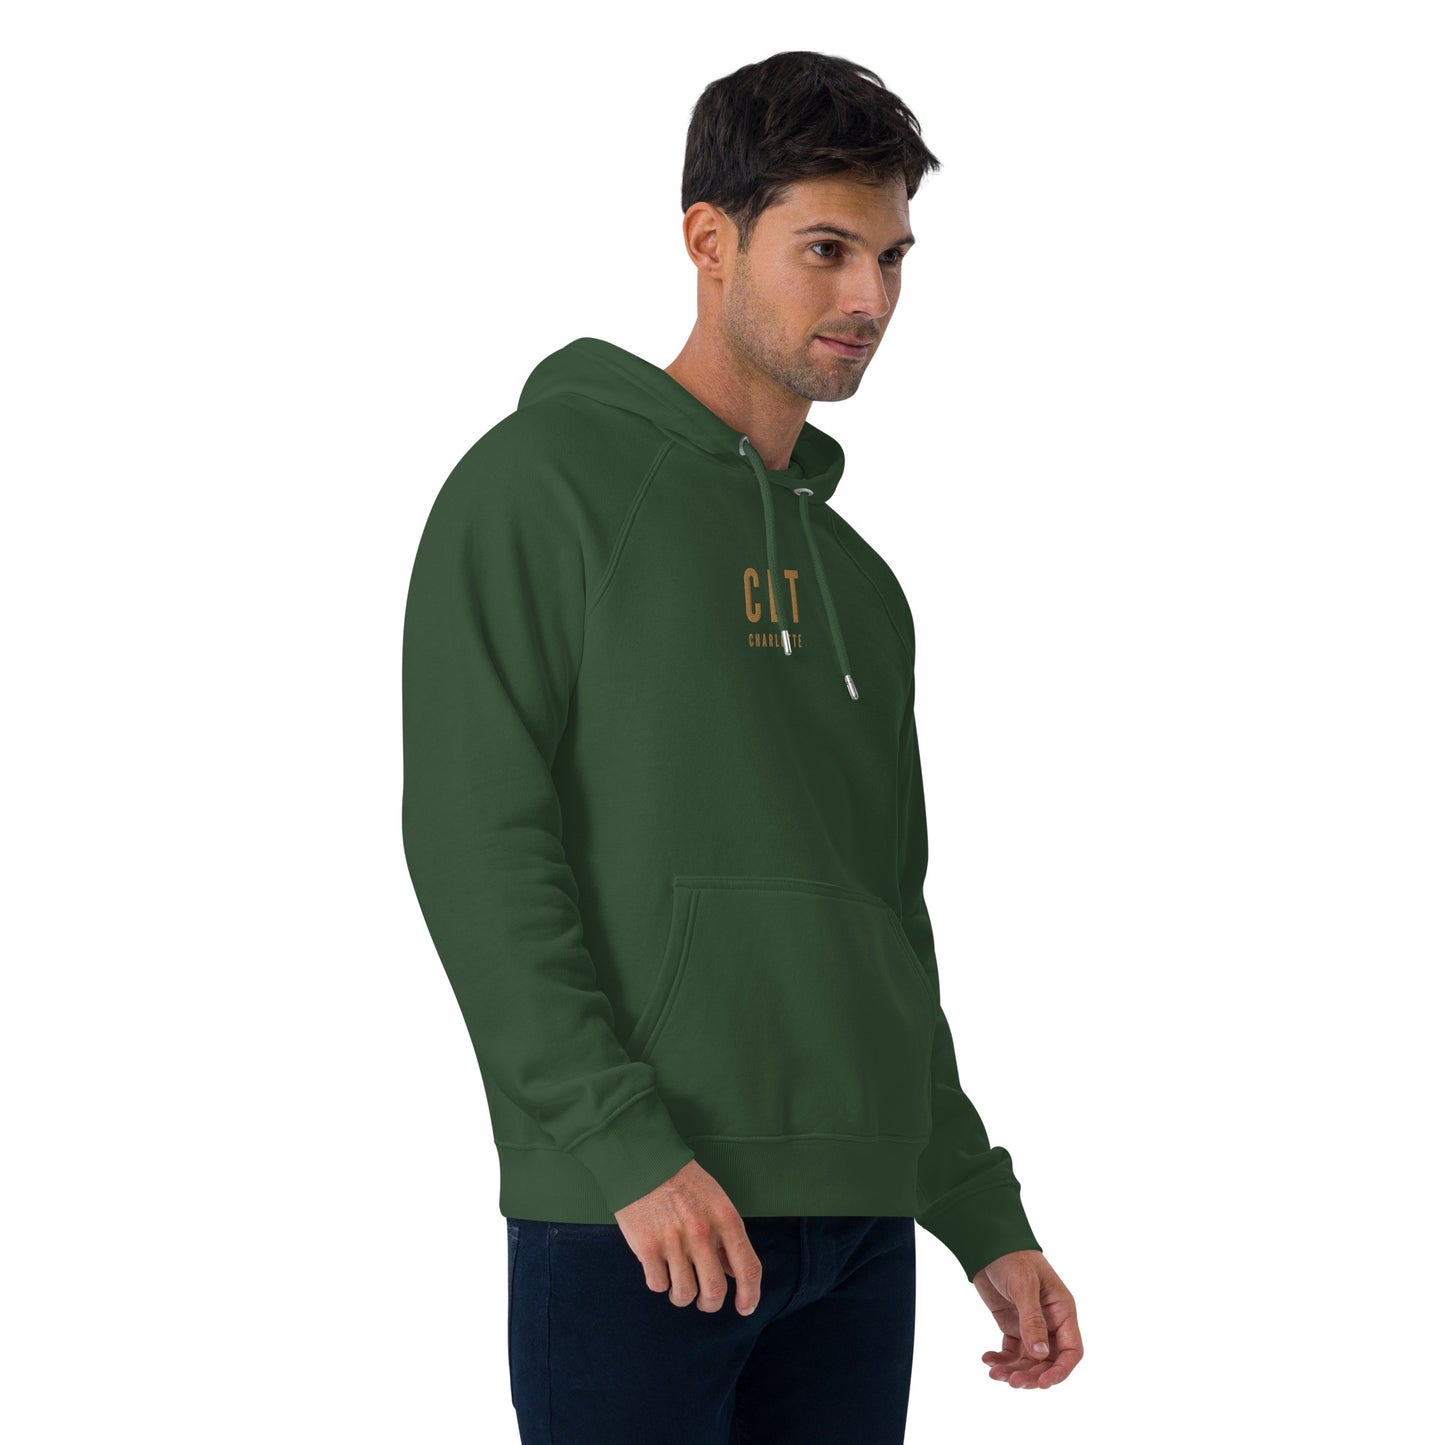 City Organic Hoodie - Old Gold • CLT Charlotte • YHM Designs - Image 02